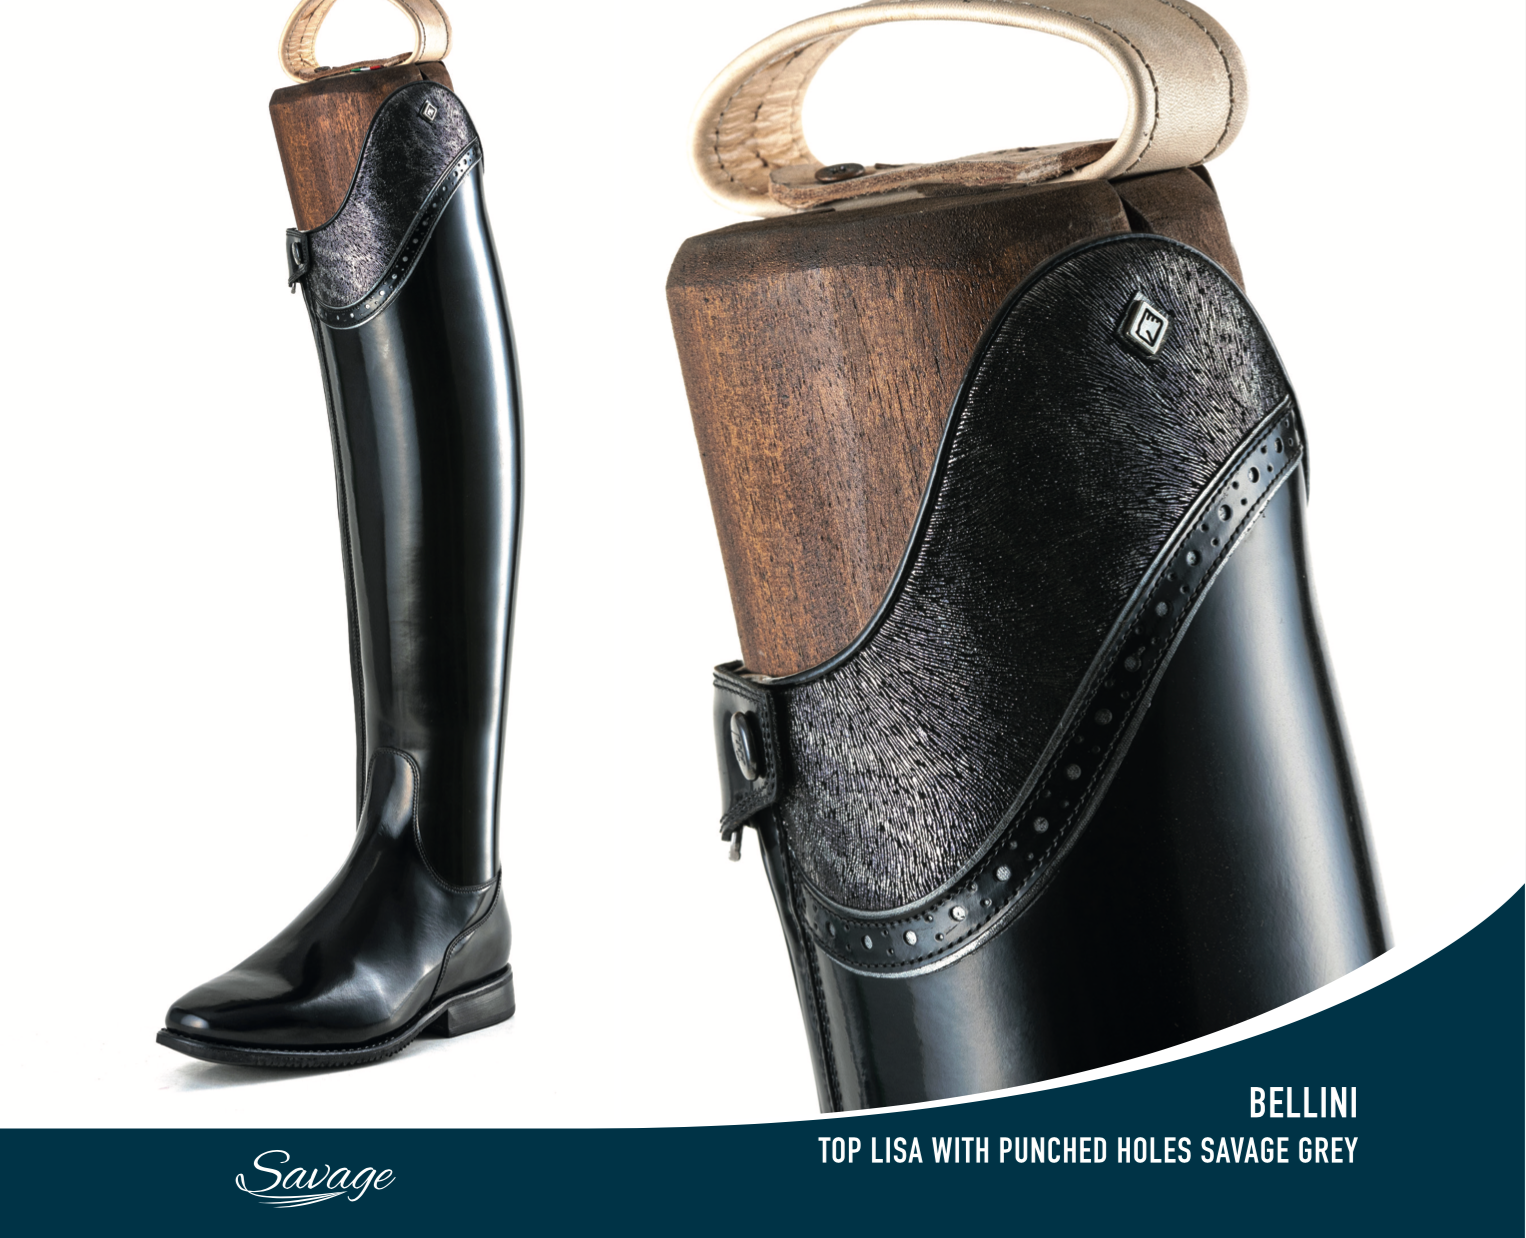 Deniro Bellini Dressage Tall boot - High-Performance Riding Boots - Gee Gee Equine